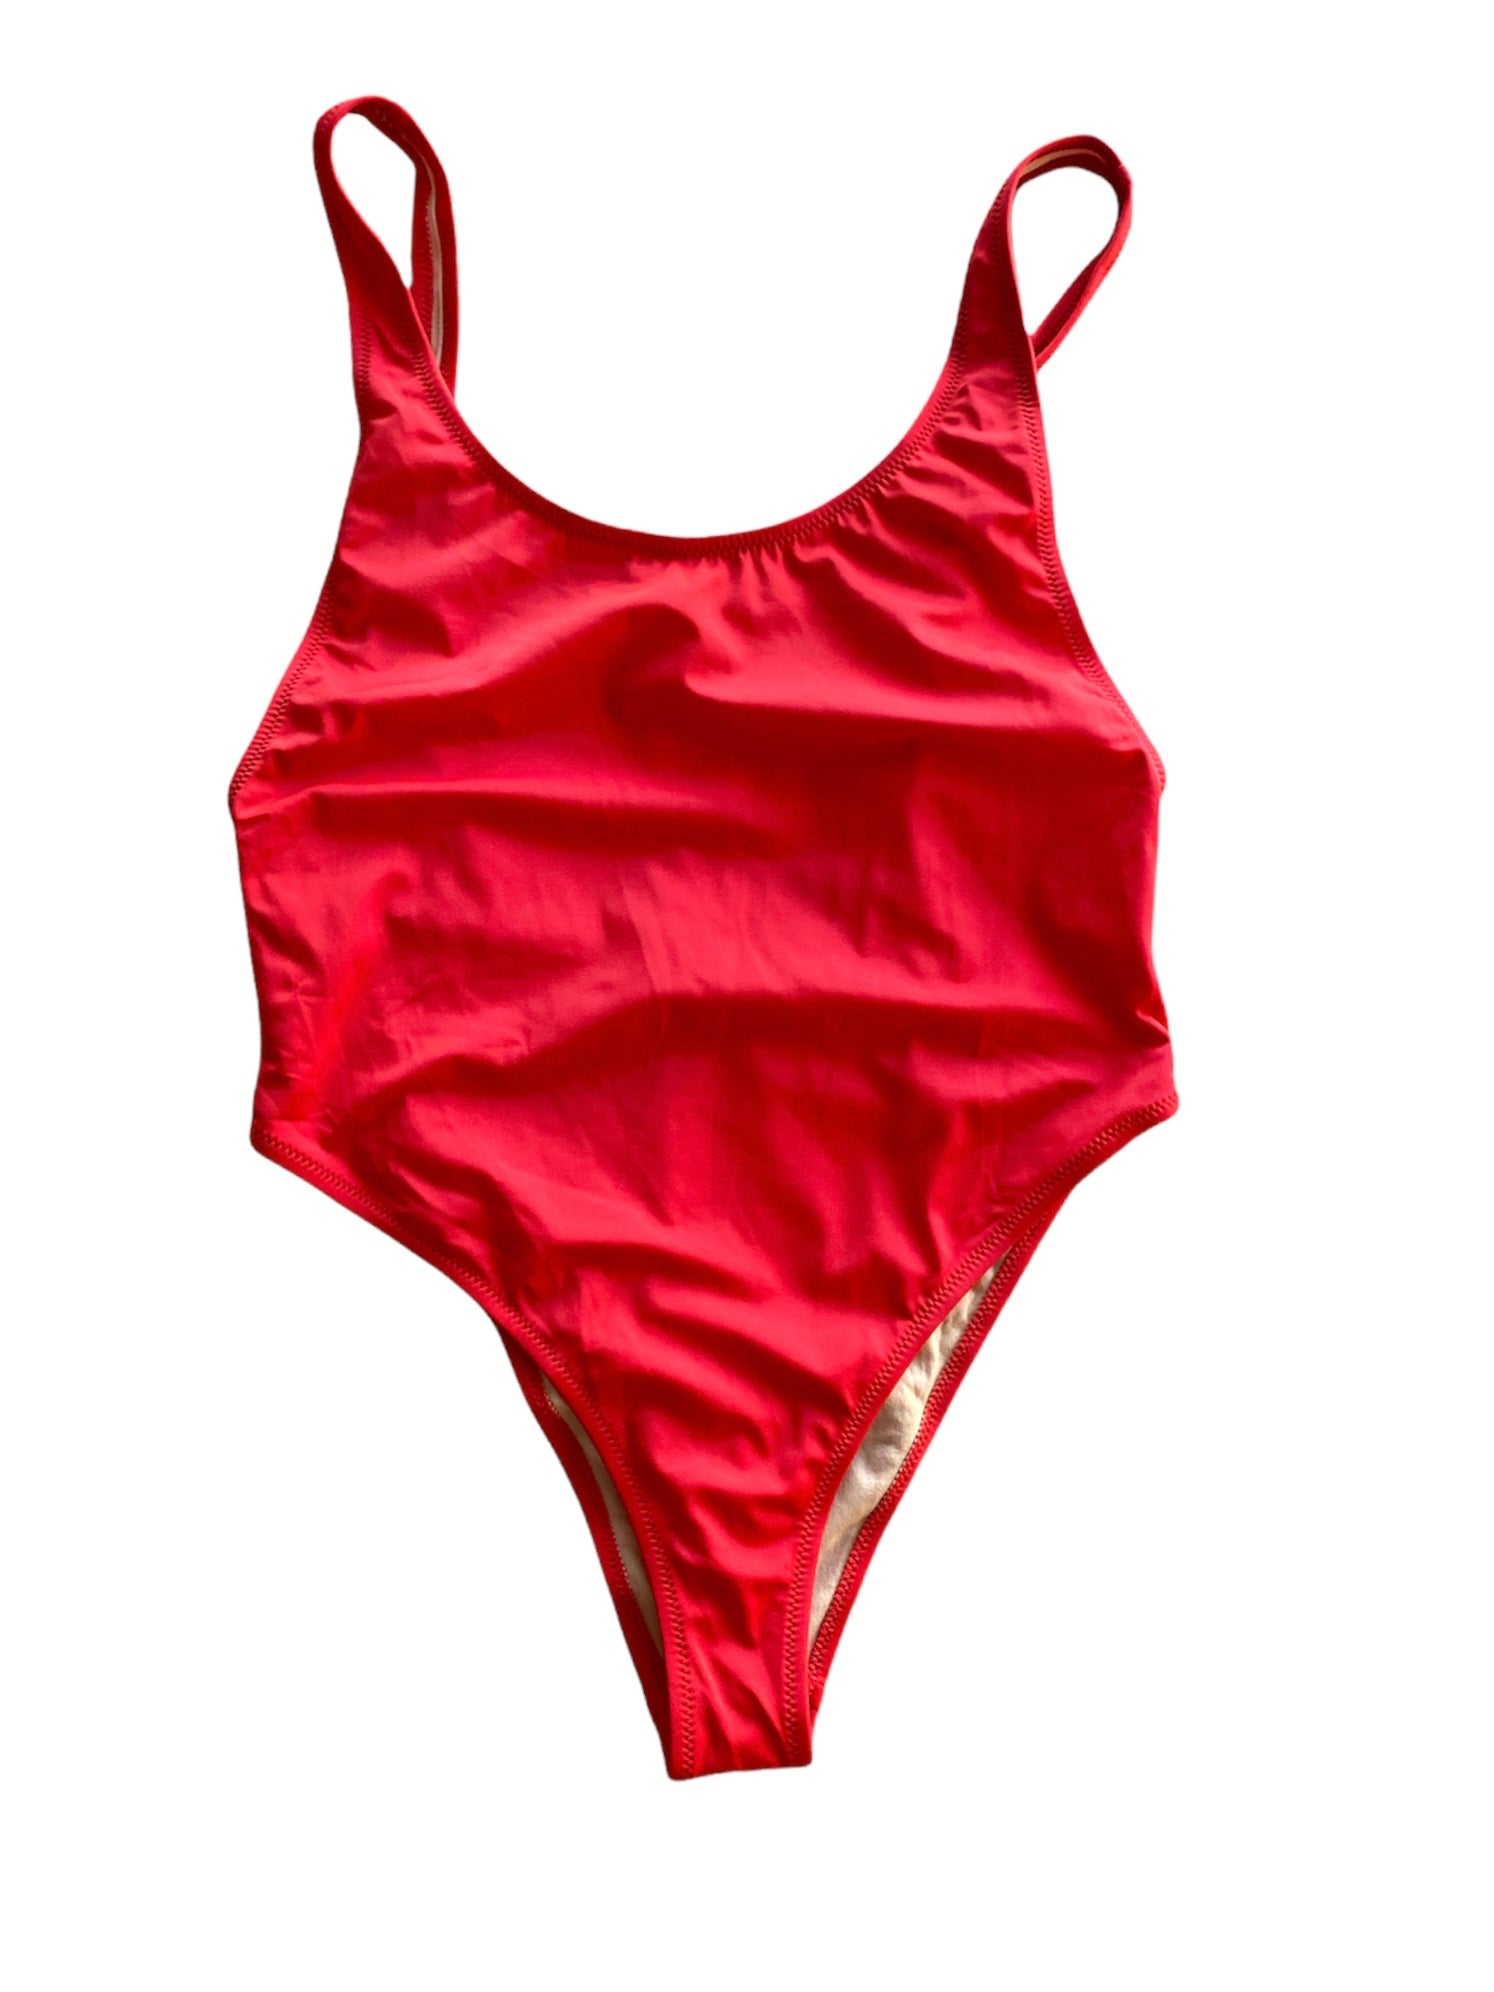 BELEM RED ONE PIECE SWIMSUIT